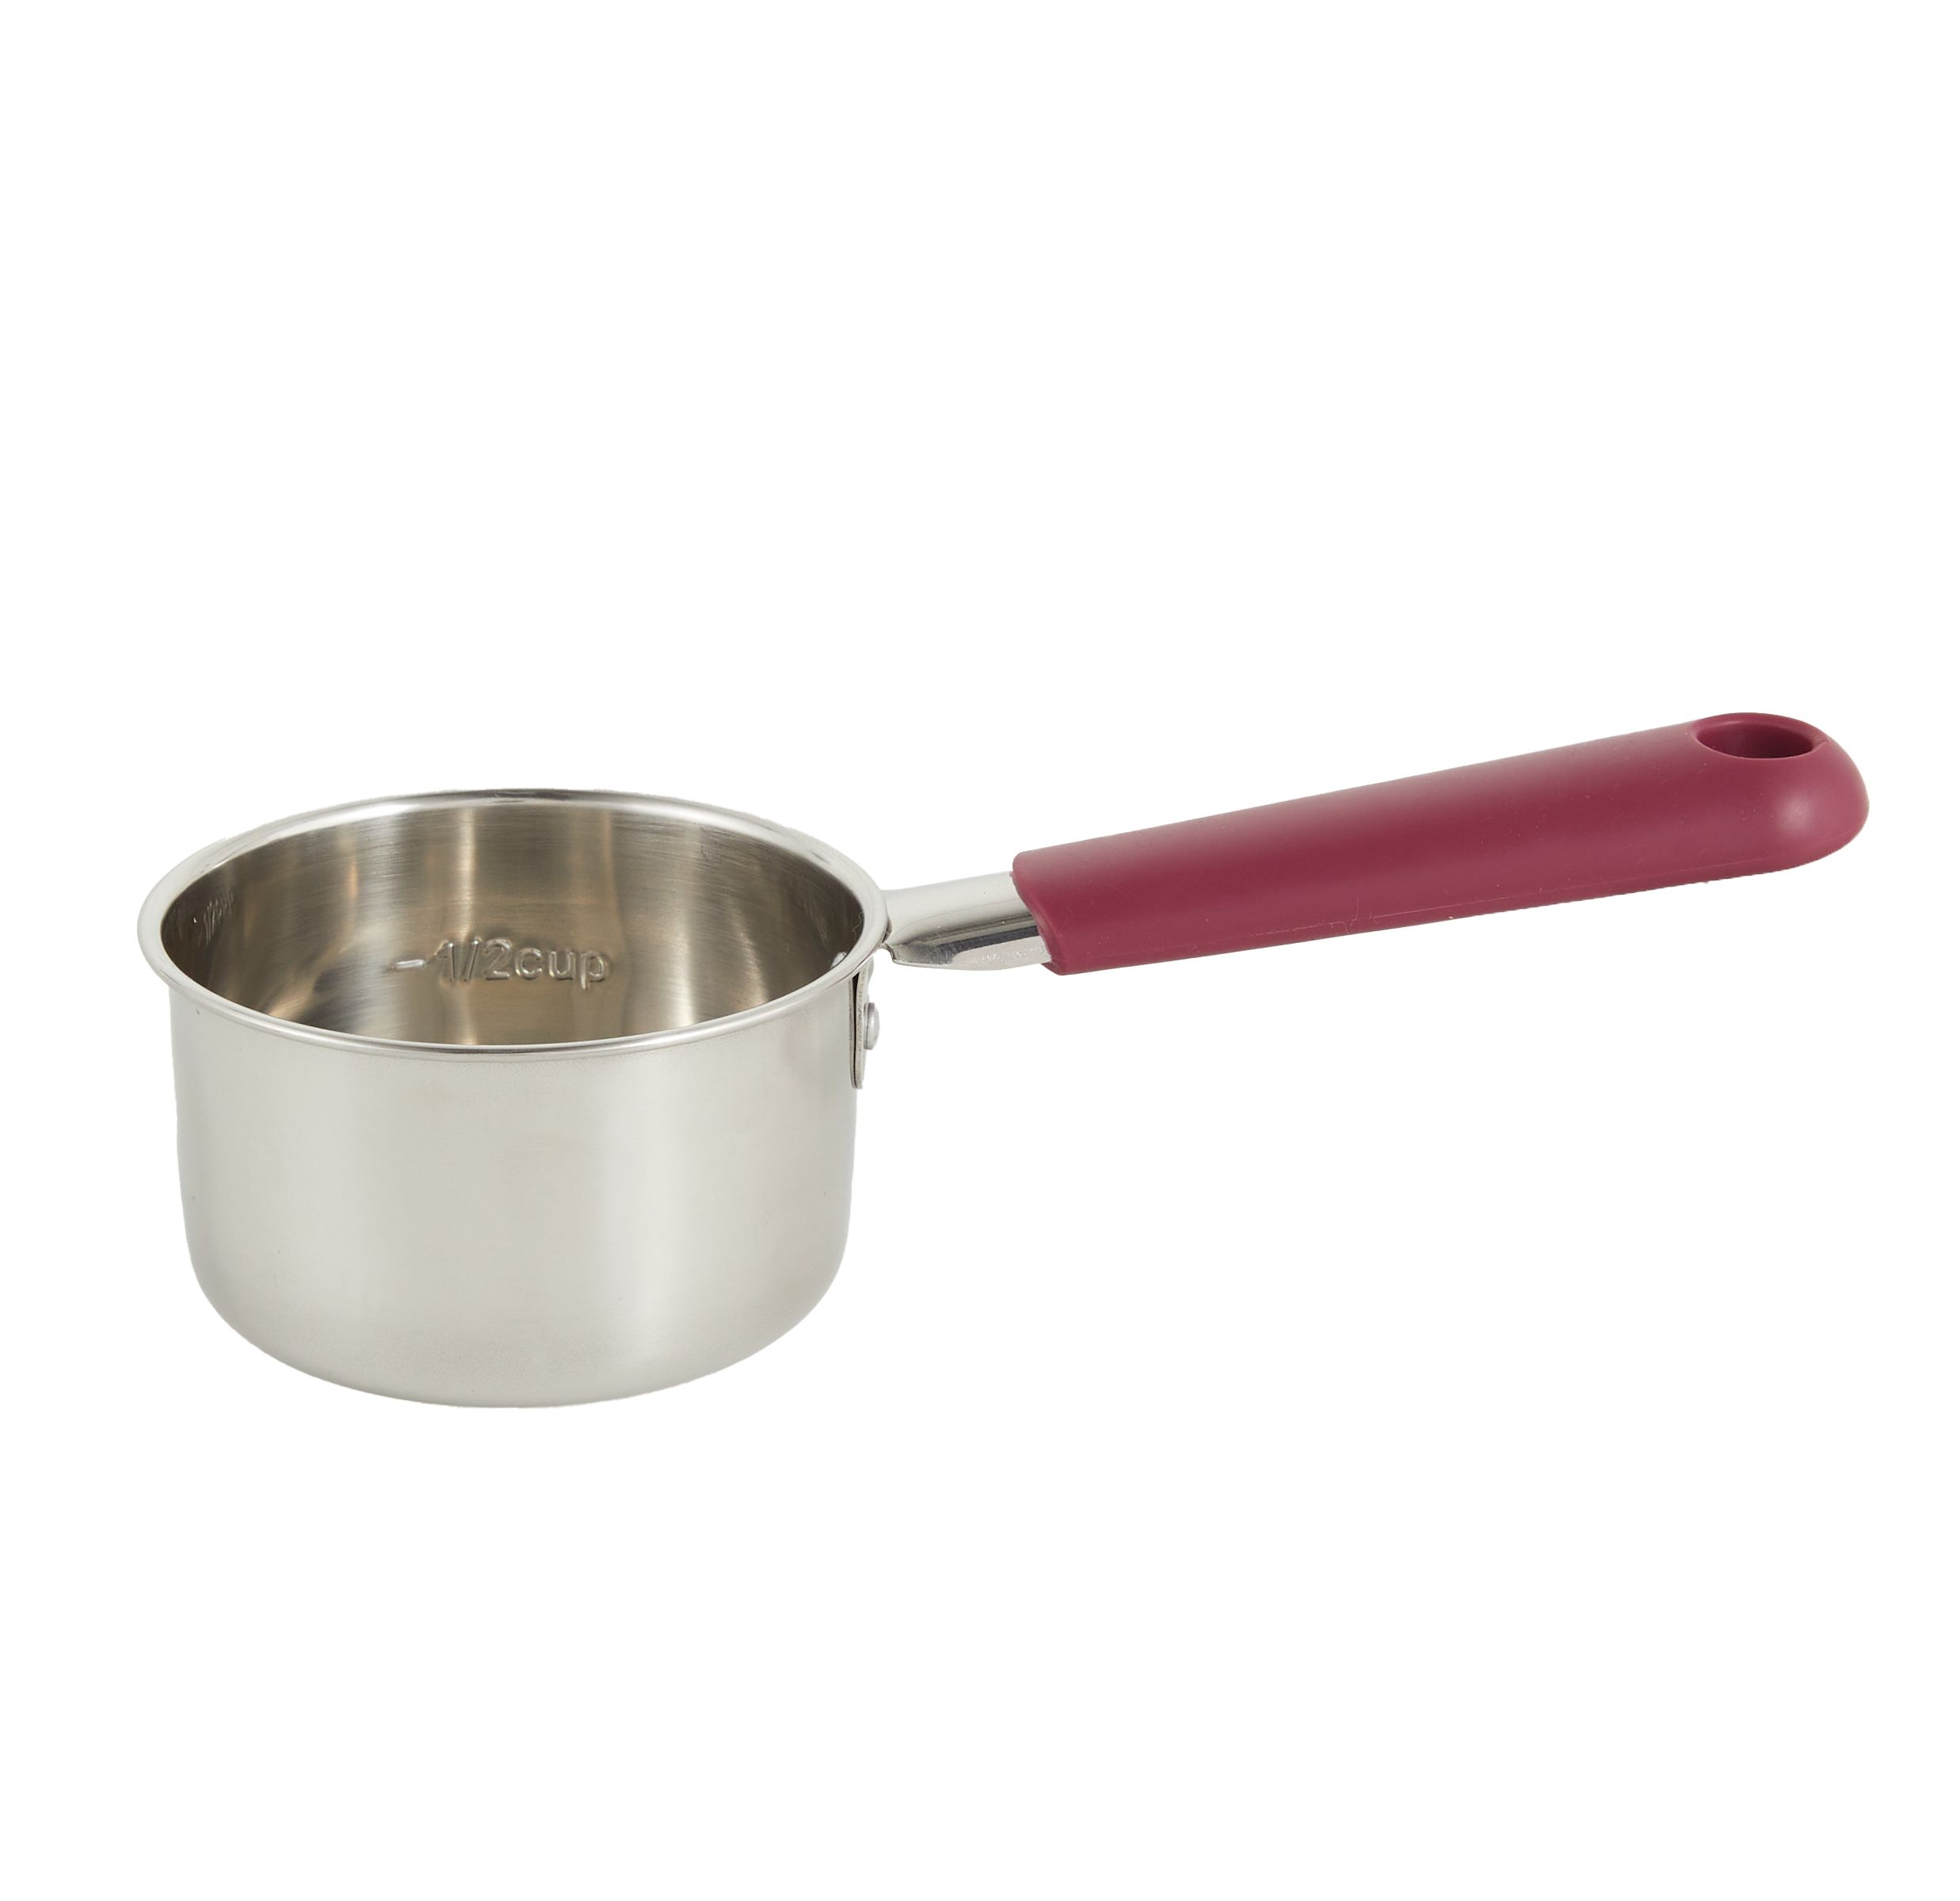 EveryYay For Good Measure Stainless Steel Food Scoop for Dogs, 1 Cup